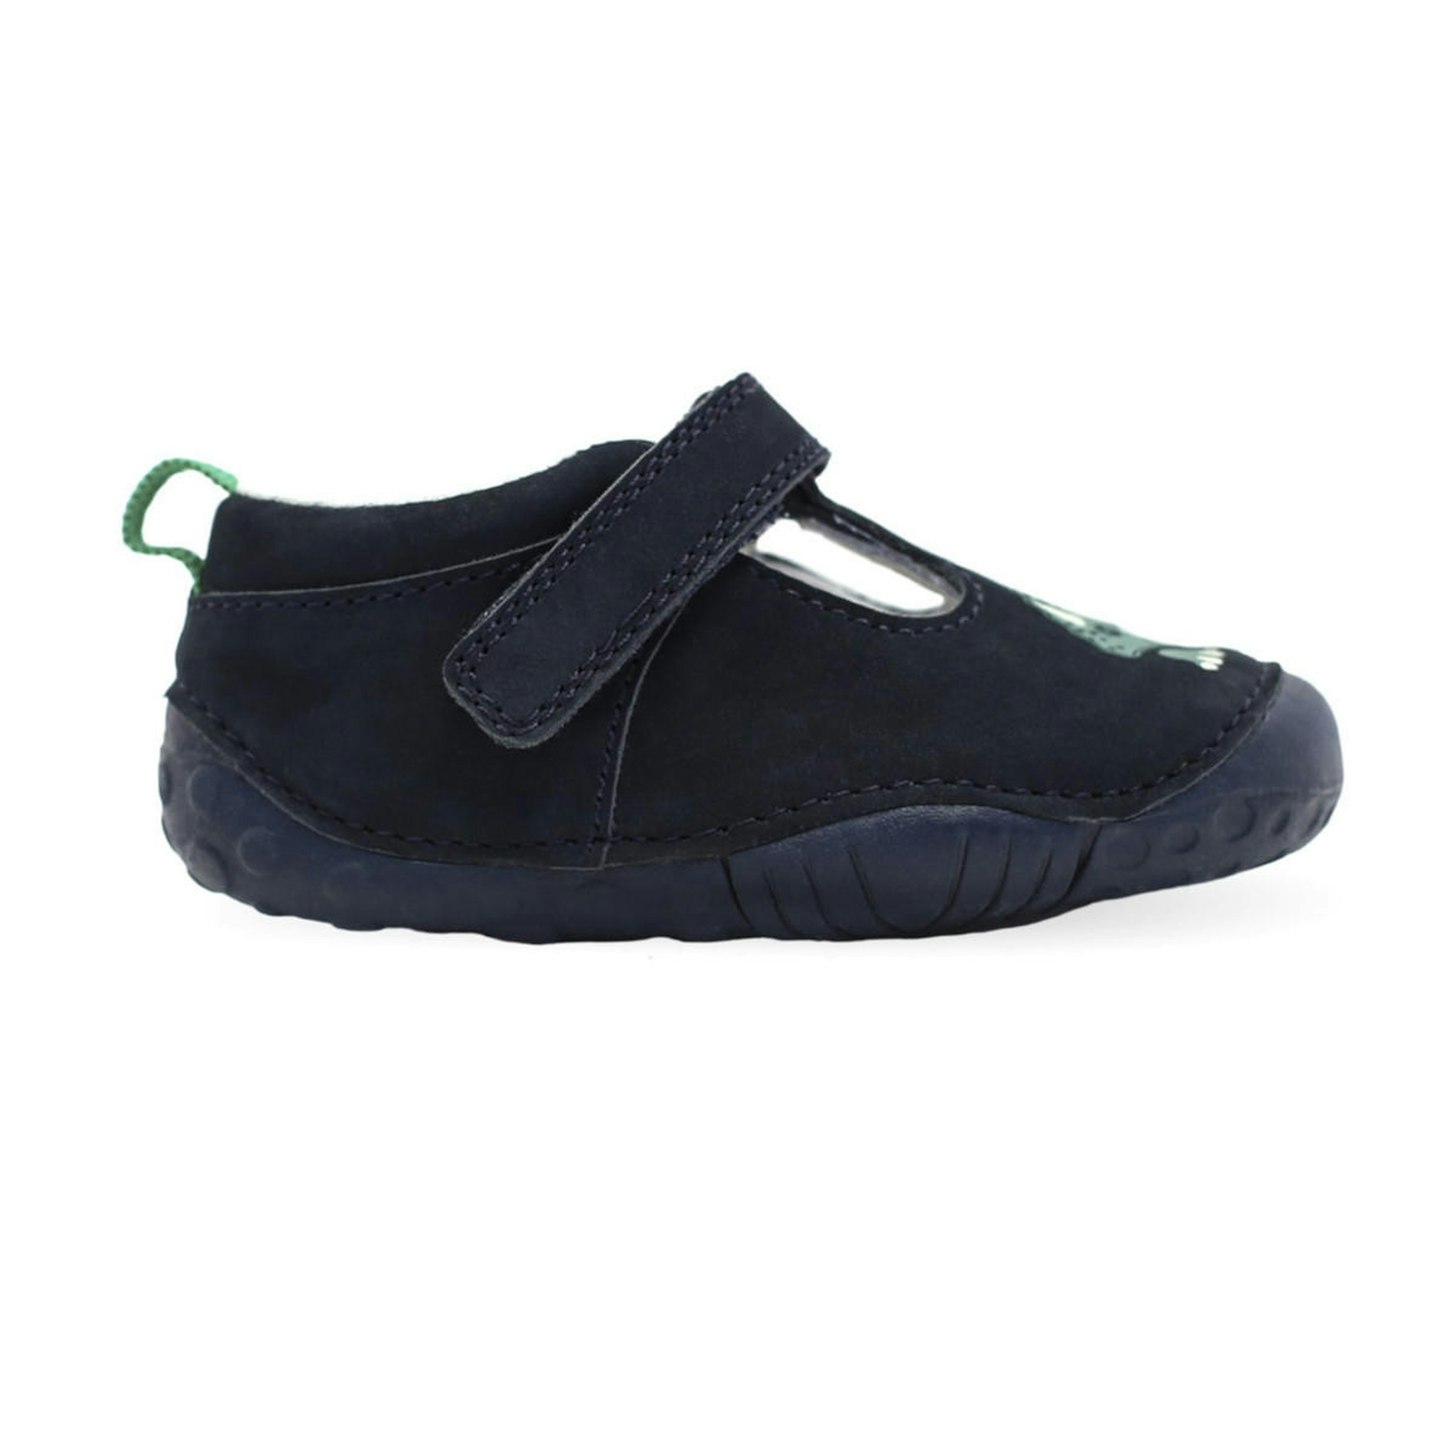 Navy blue nubuck boys t-bar pre-walkers baby's first shoes